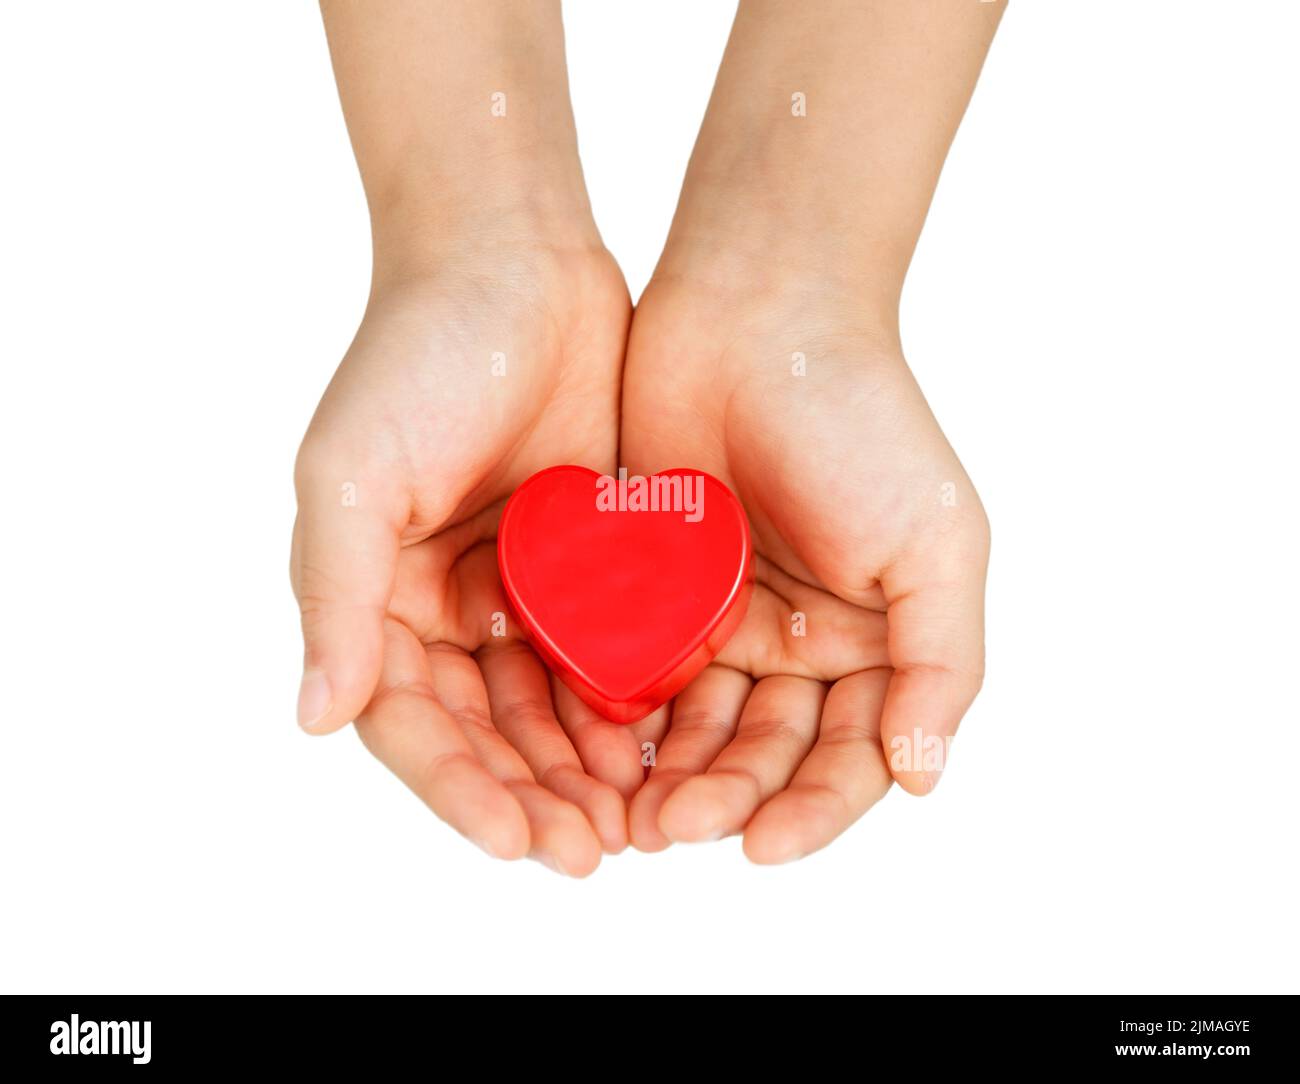 Heart care, medical concept. Heart in the hands of a child. Isolated on white. Stock Photo